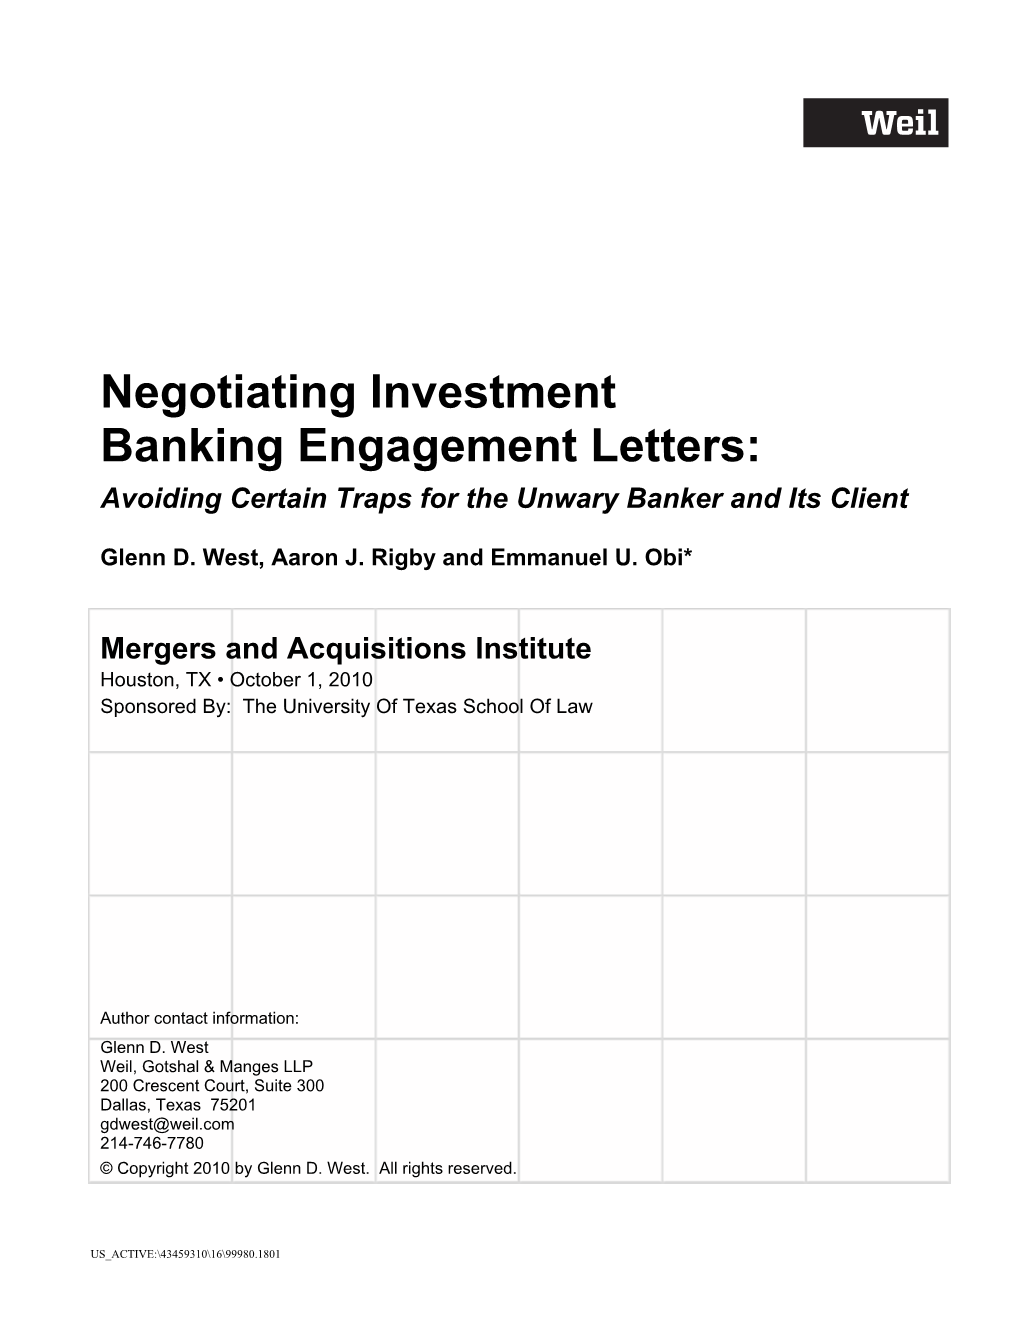 Negotiating Investment Banking Engagement Letters: Avoiding Certain Traps for the Unwary Banker and Its Client